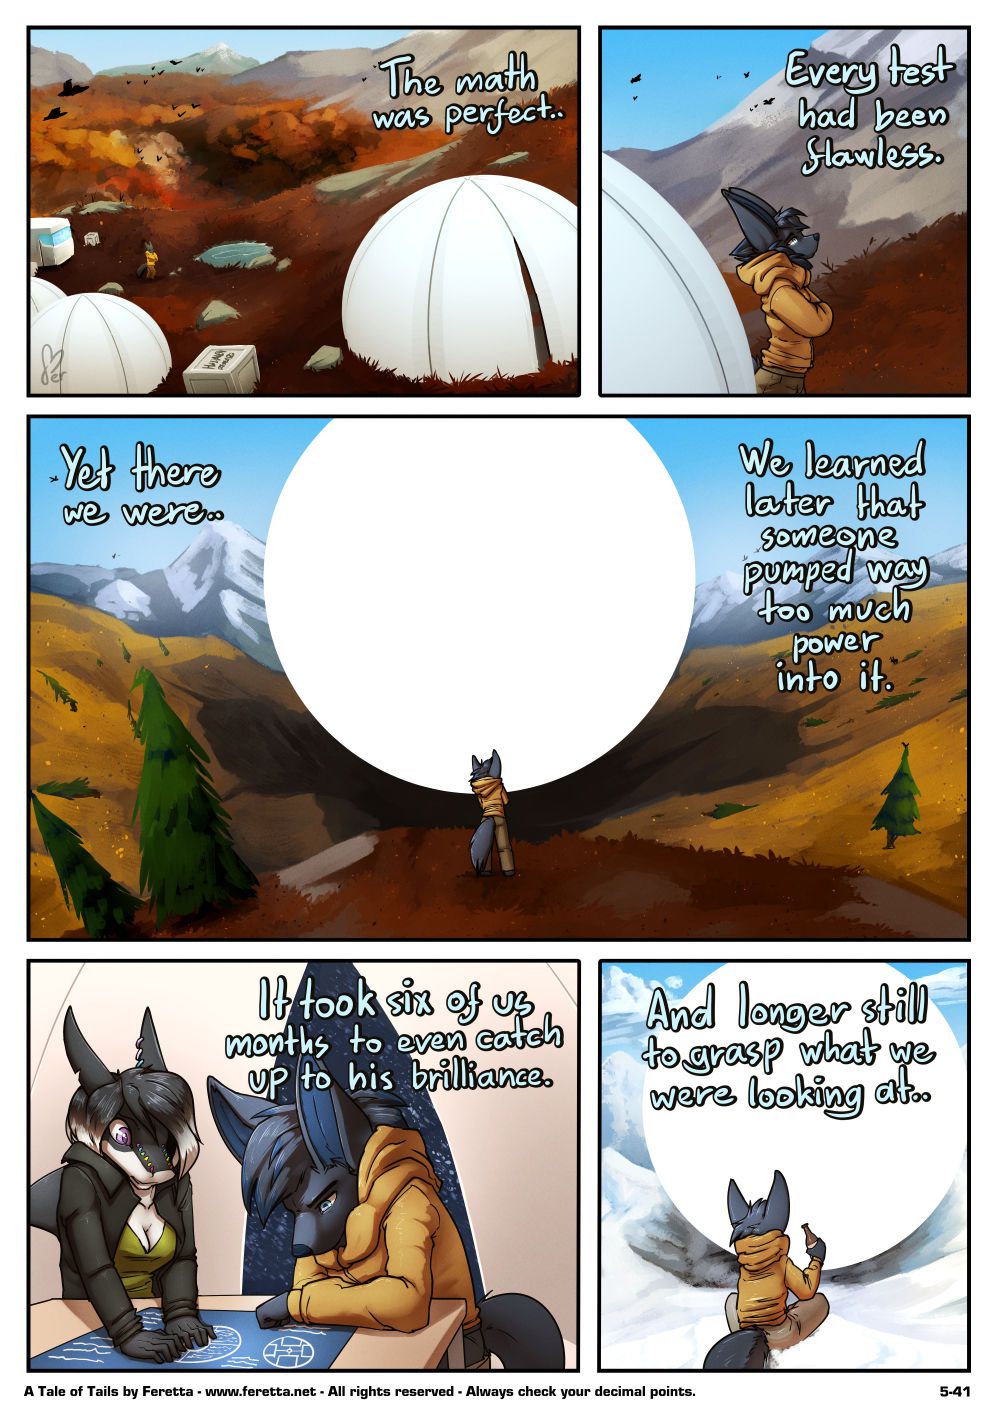 [Feretta] Farellian Legends: A Tale of Tails (w/Extras) [Ongoing] 253